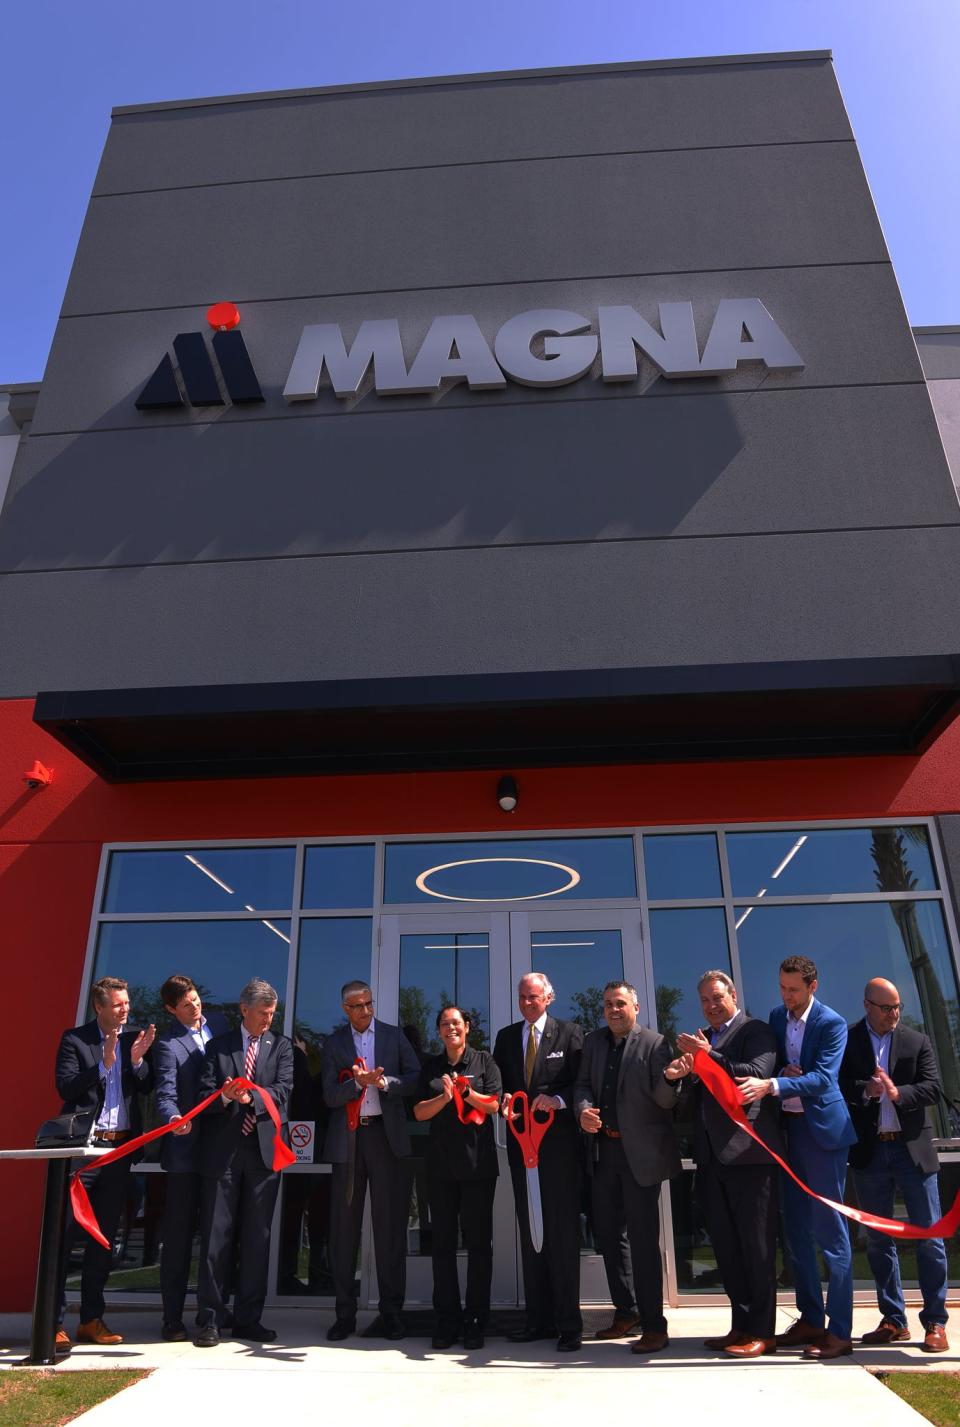 MAGNA celebrated the grand opening of its South Carolina facility in Duncan, Thursday, April 7, 2022. The manufacturing facility, which produces high-tech exterior mirror for three automakers including BMW, has over 250 employees with expectation of 400. South Carolina Governor Henry McMaster toured the plant and participated in a ribbon-cutting ceremony to welcome the business to the state. 